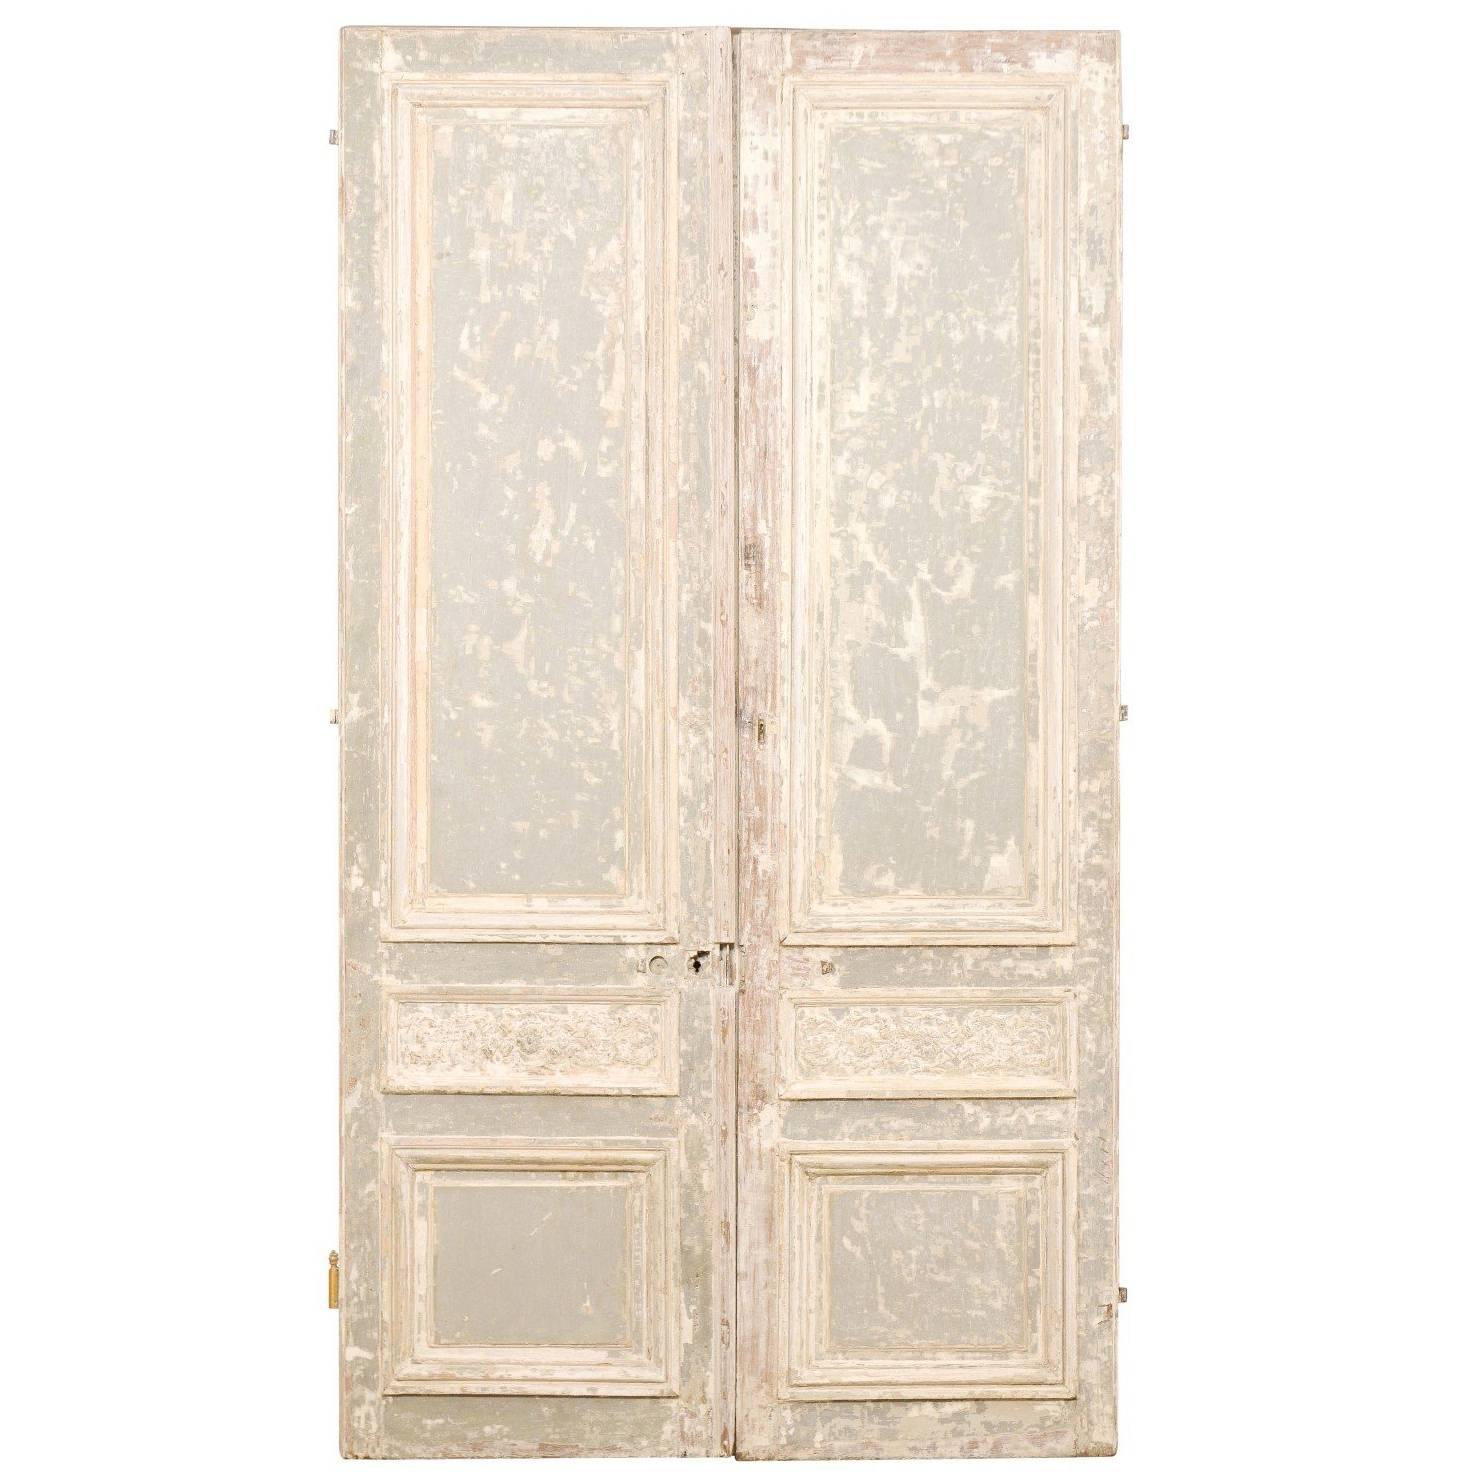 Pair of Tall French Doors with Scraped Paint Finish in Light Grey and Cream